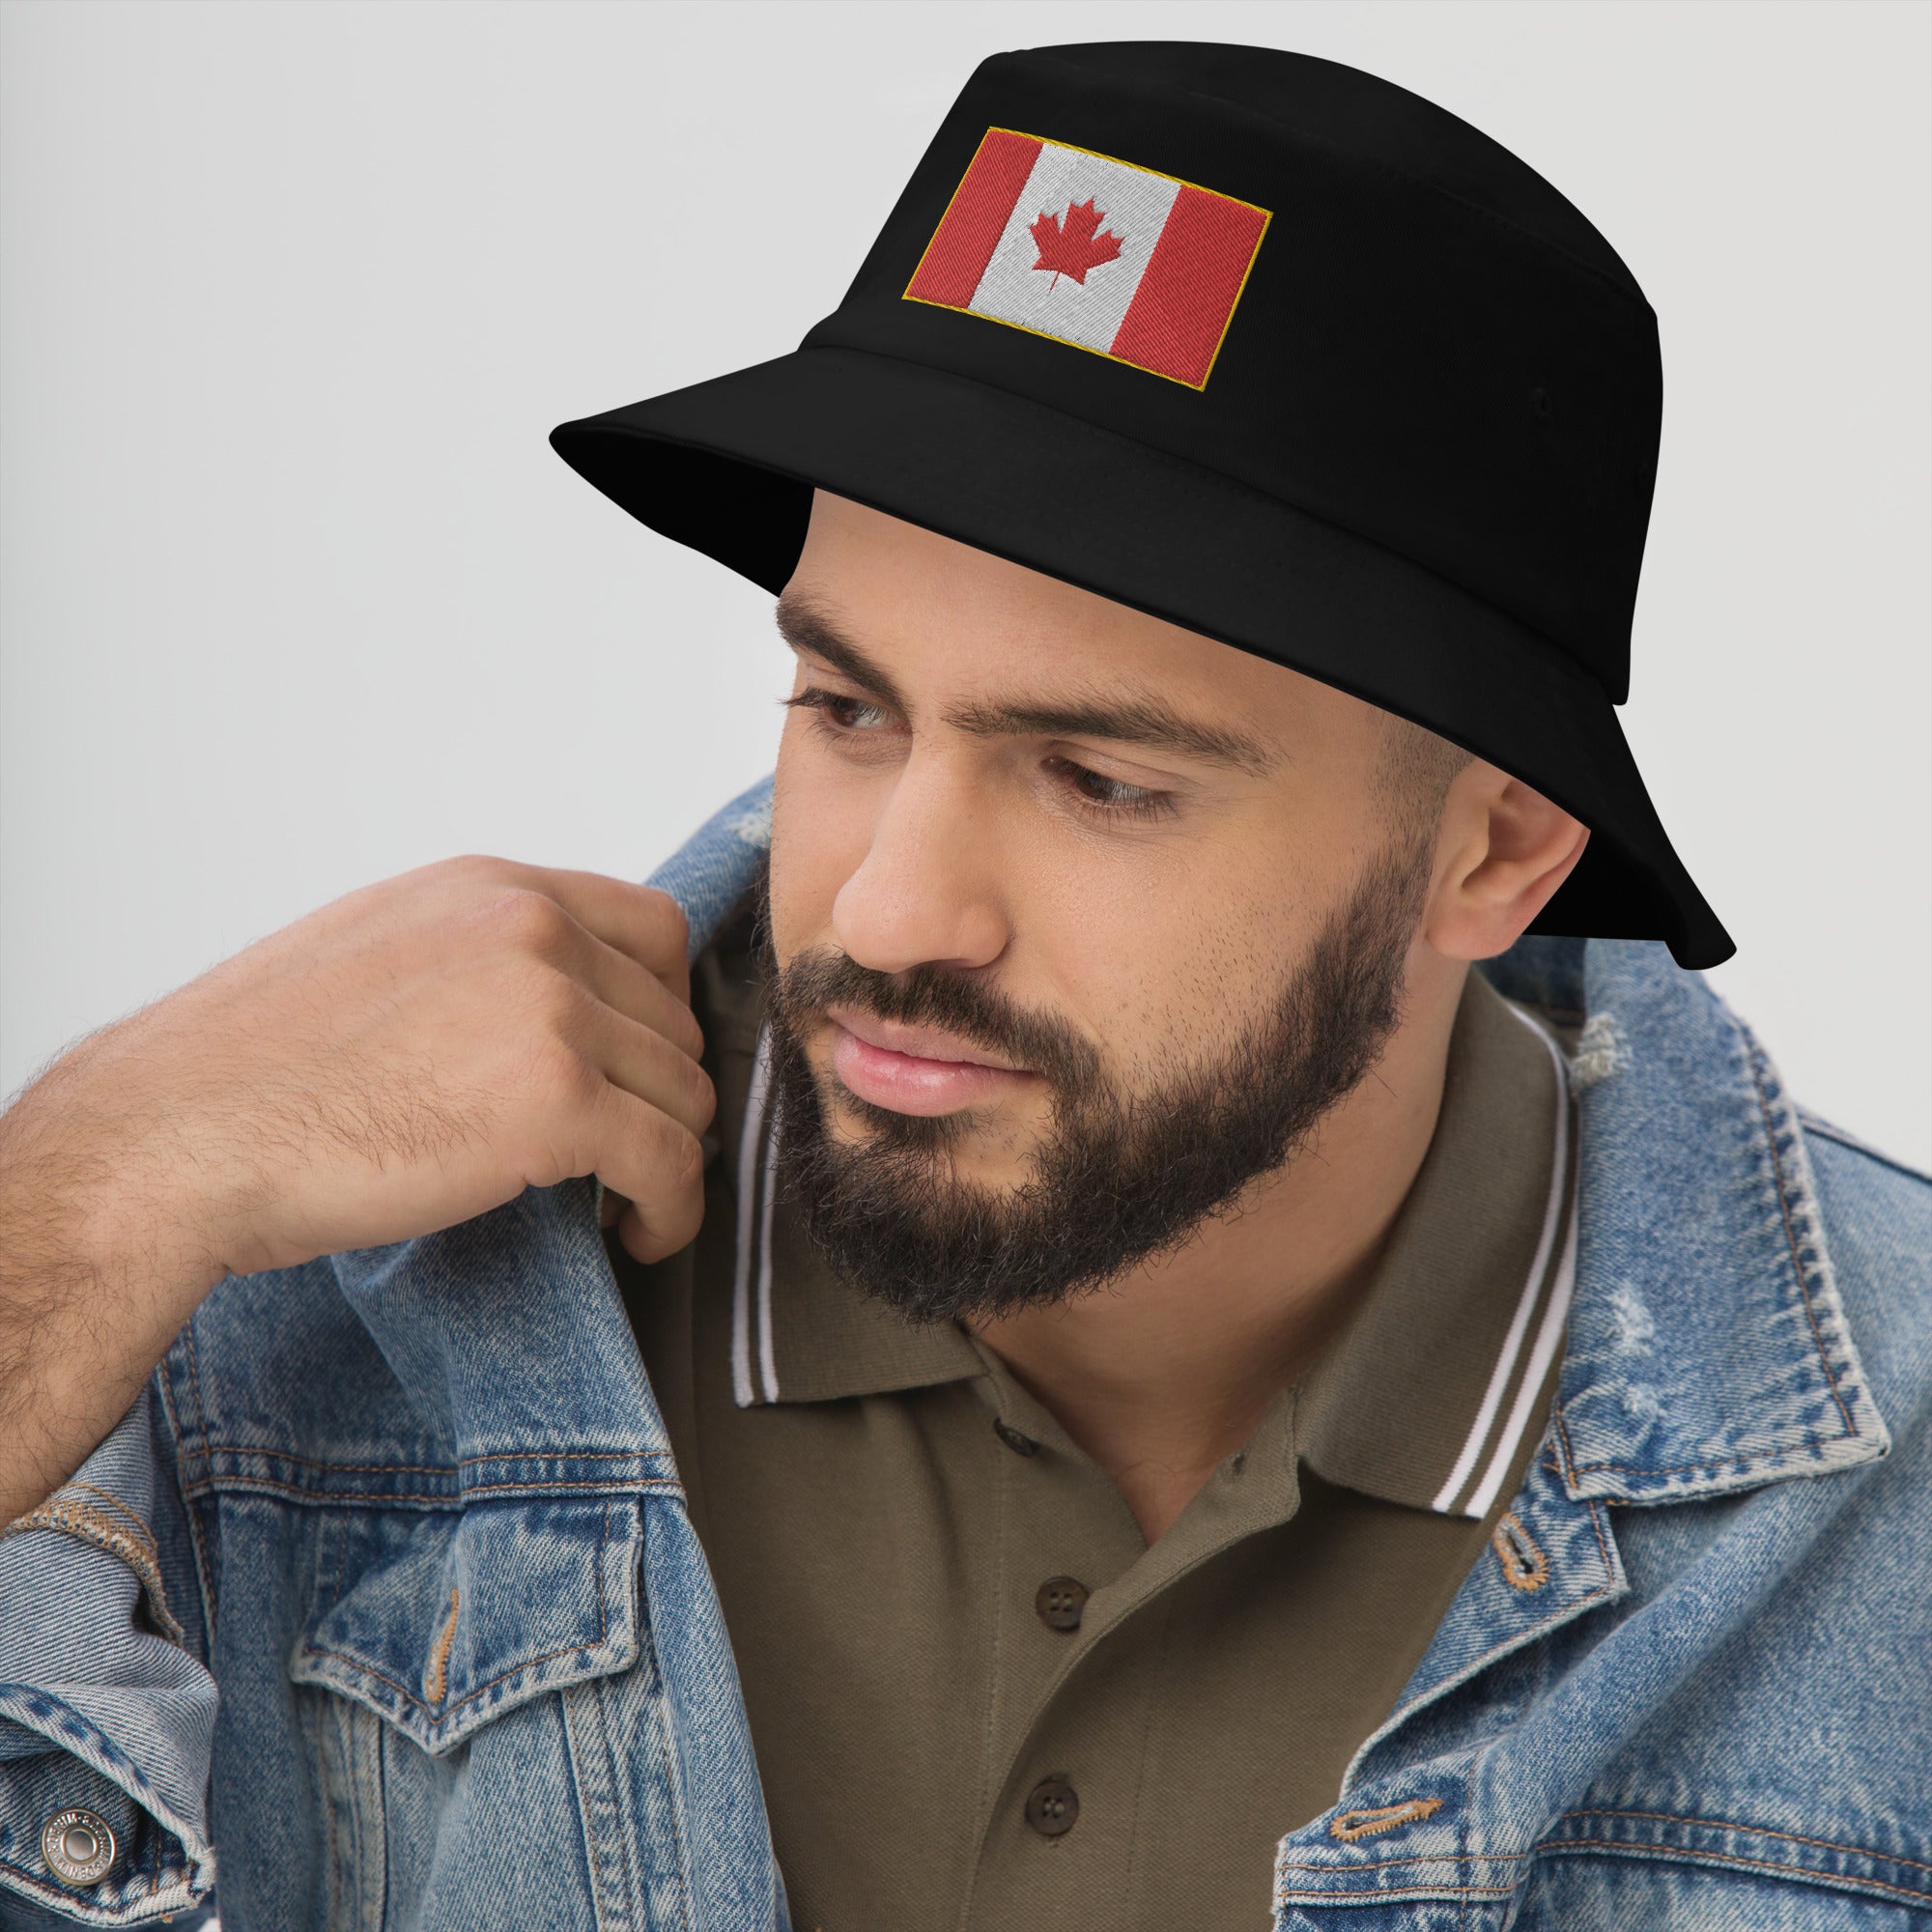 The National Flag of Canada Embroidered Bucket Hat